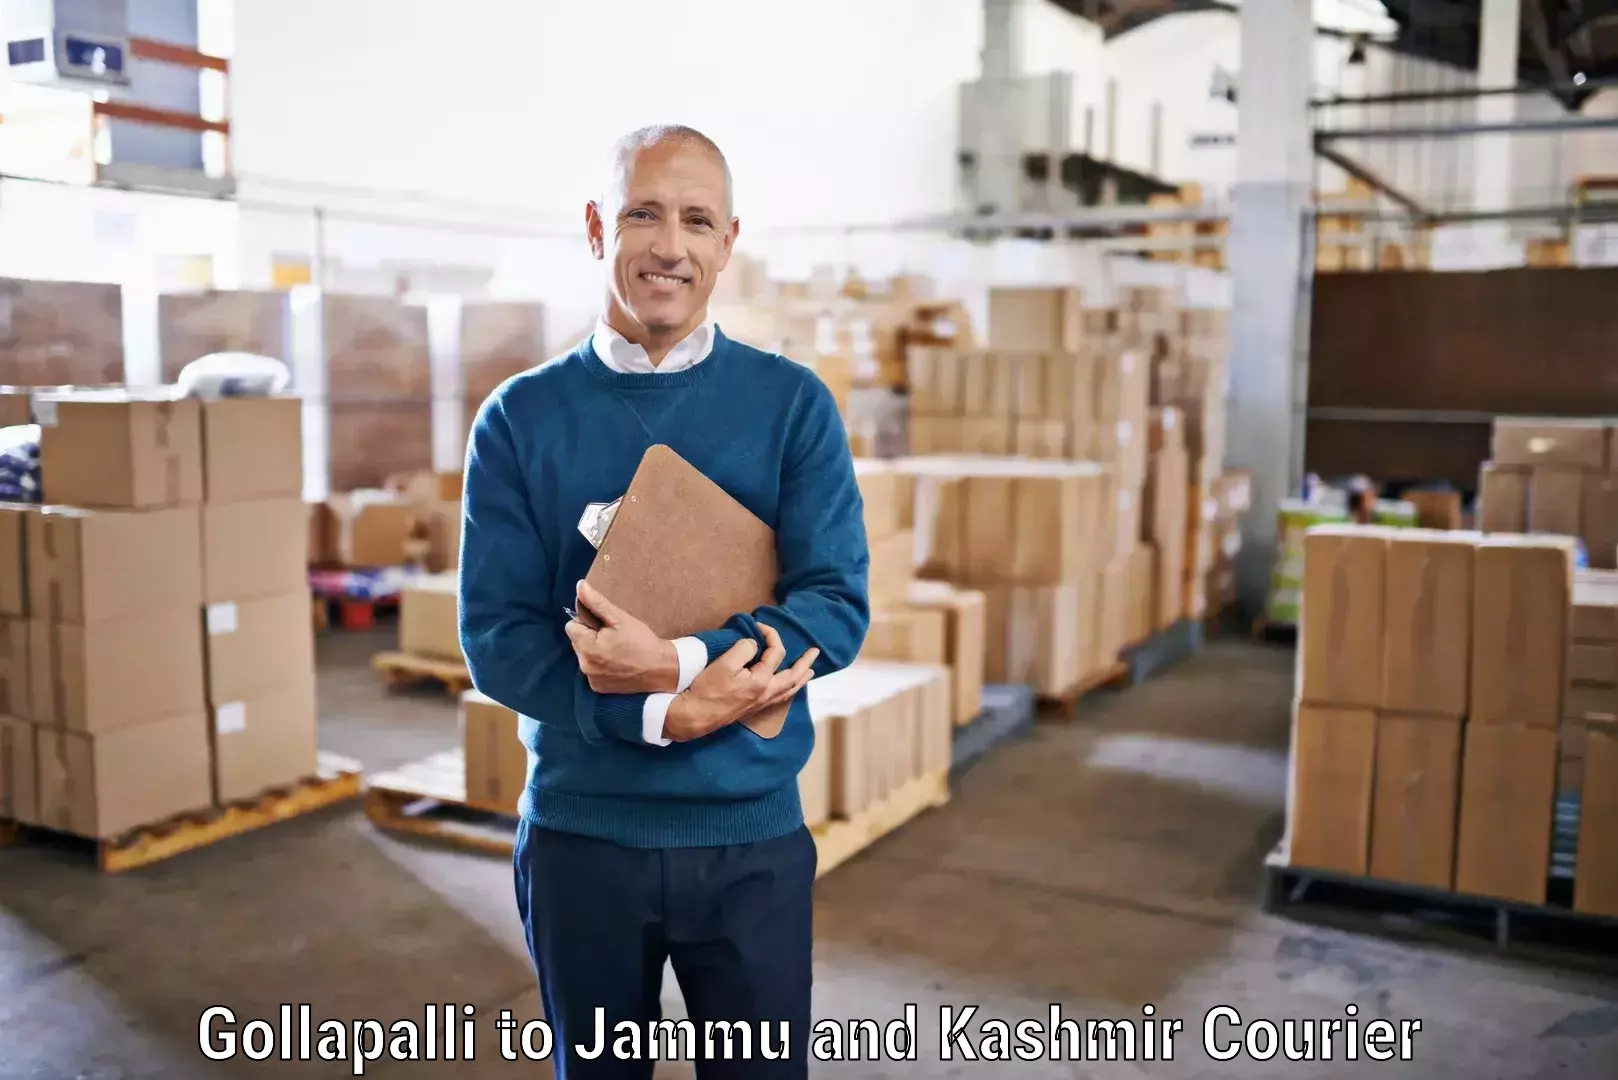 Overnight delivery services Gollapalli to Jammu and Kashmir